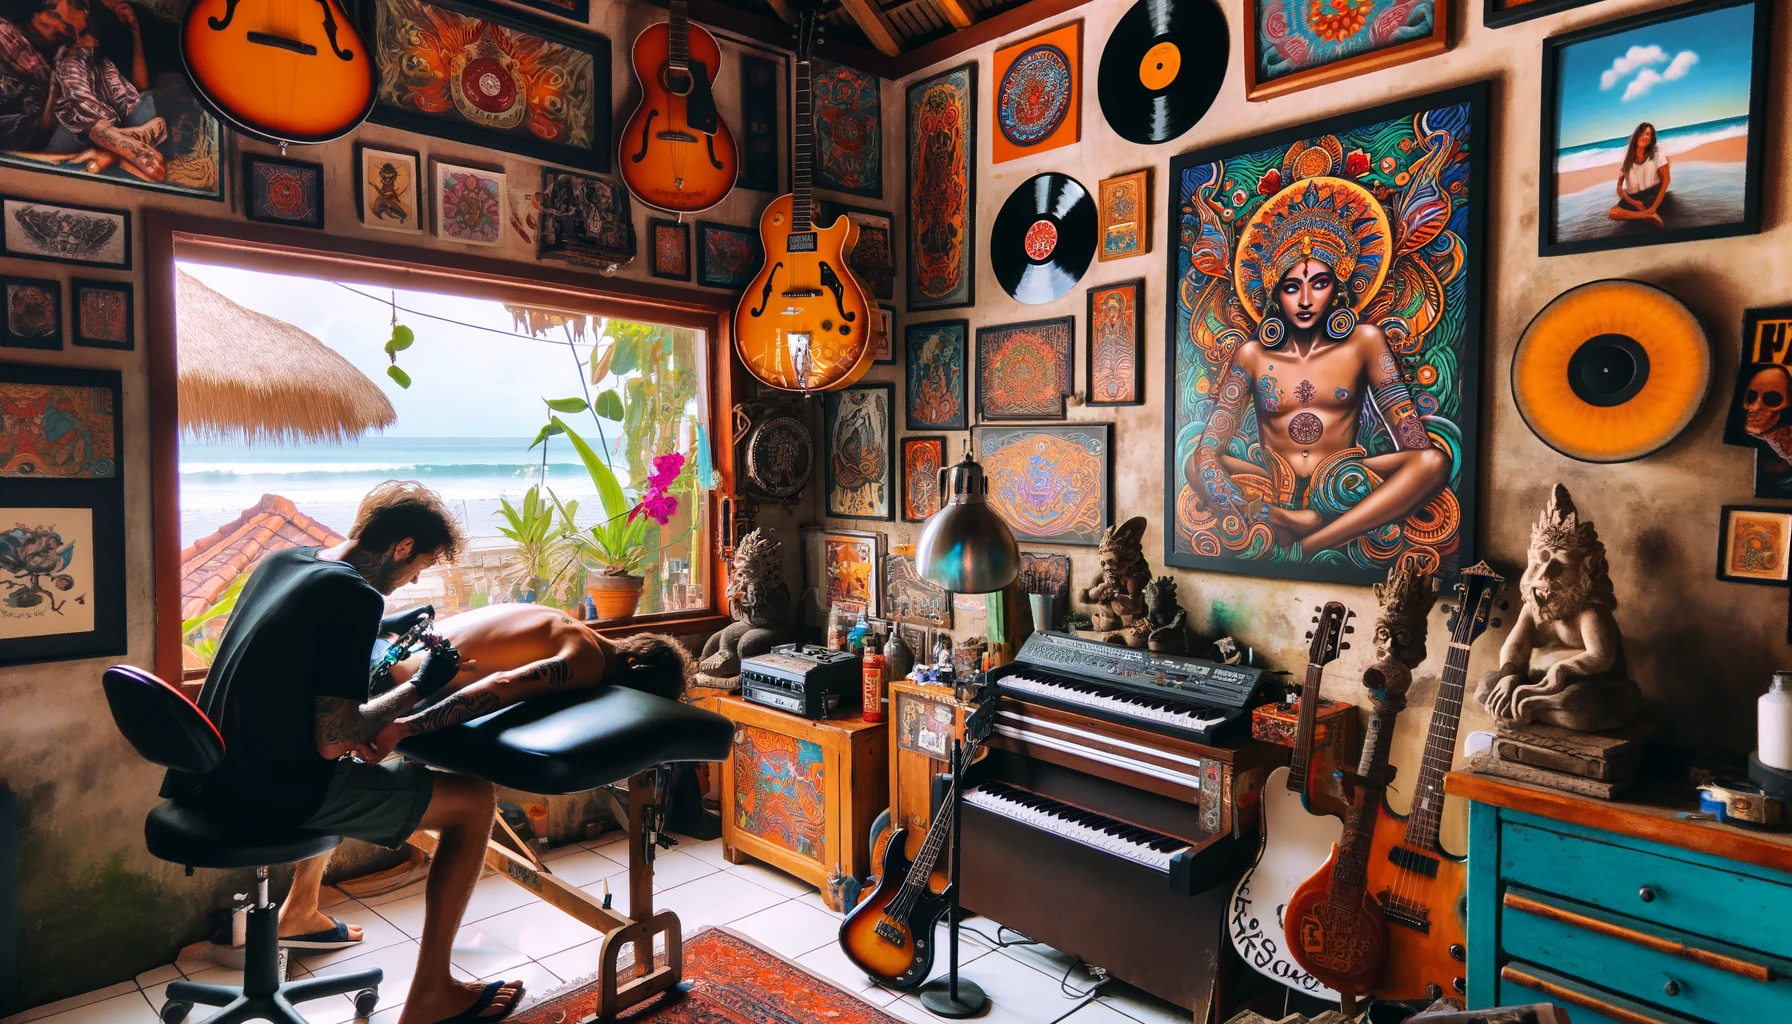 A vibrant and artistic scene in Canggu, Bali, featuring a tattoo studio with a bohemian, musical vibe